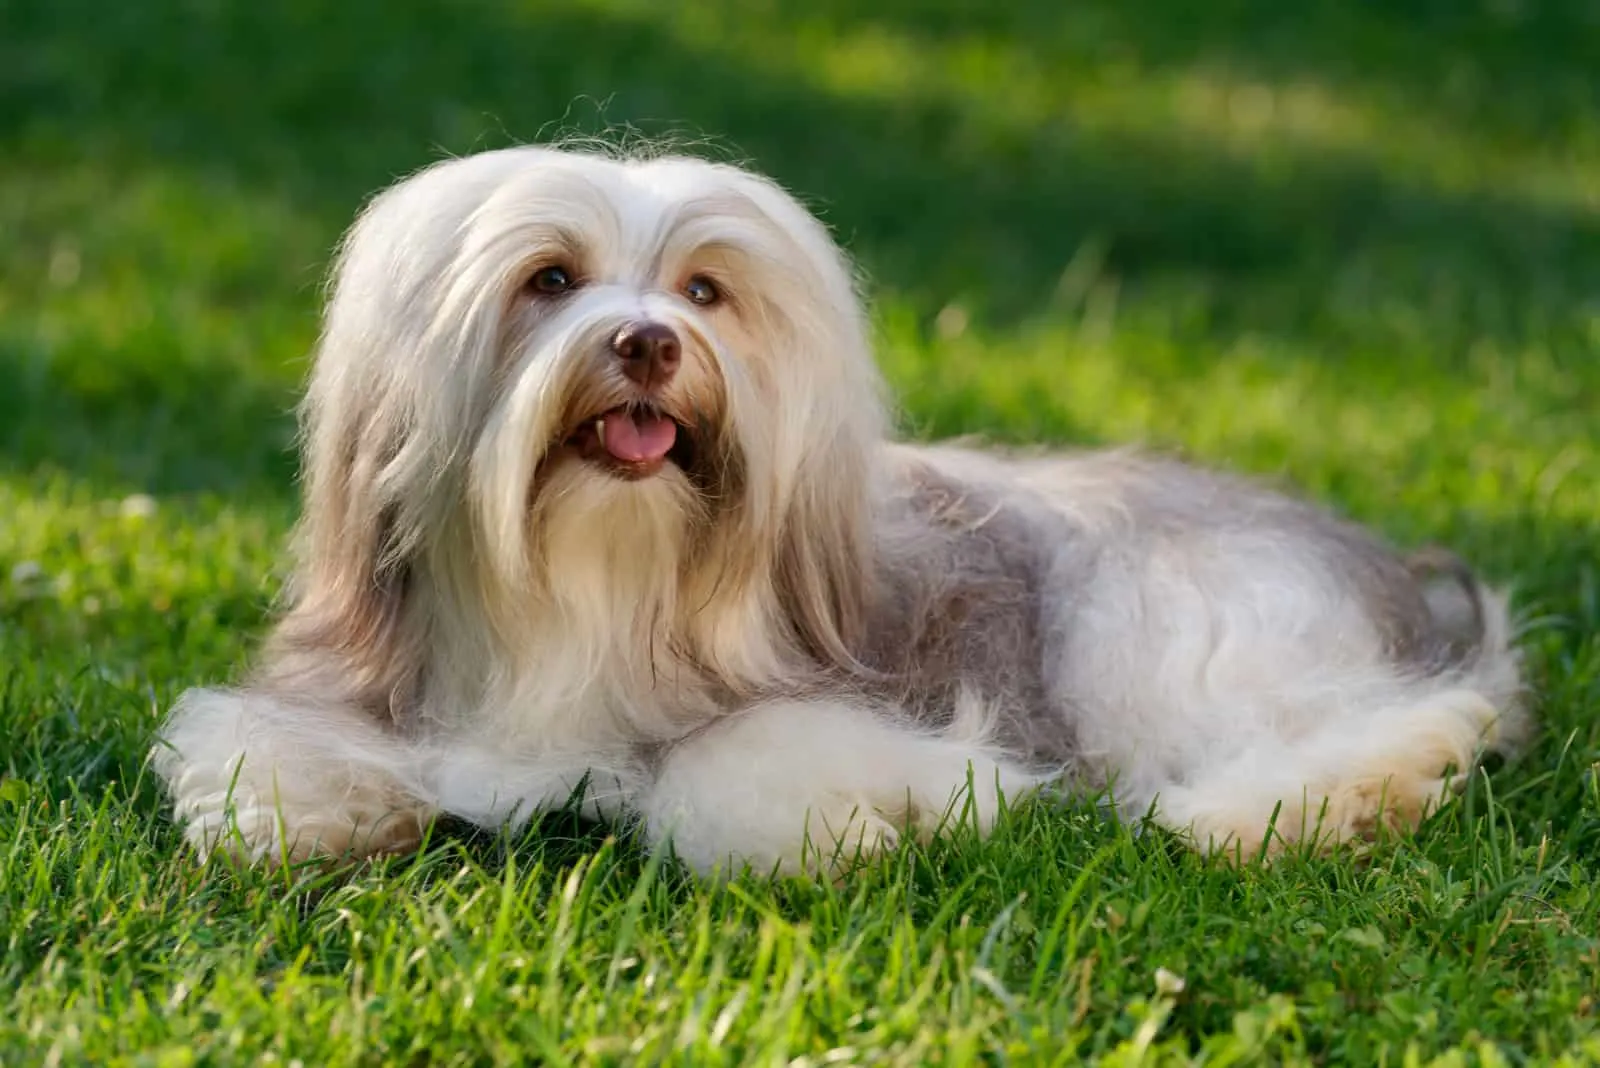 the beautiful Havanese lies on the grass